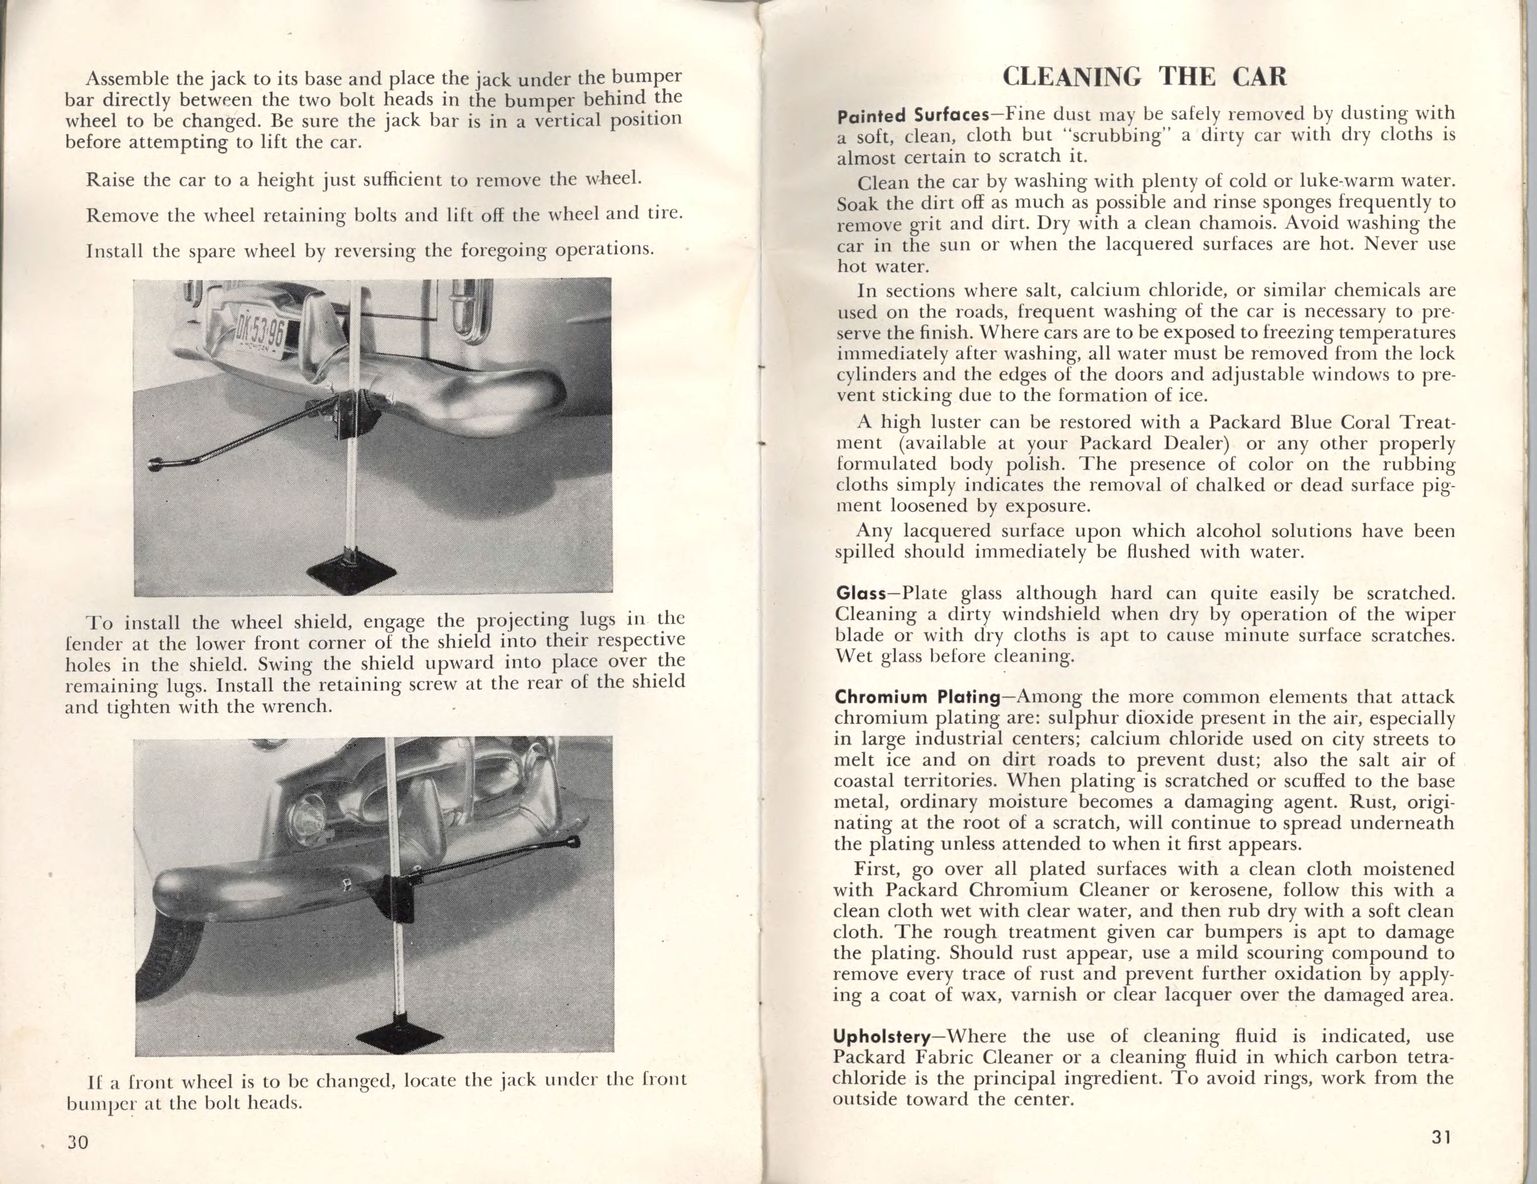 1951 Packard Owners Manual Page 11